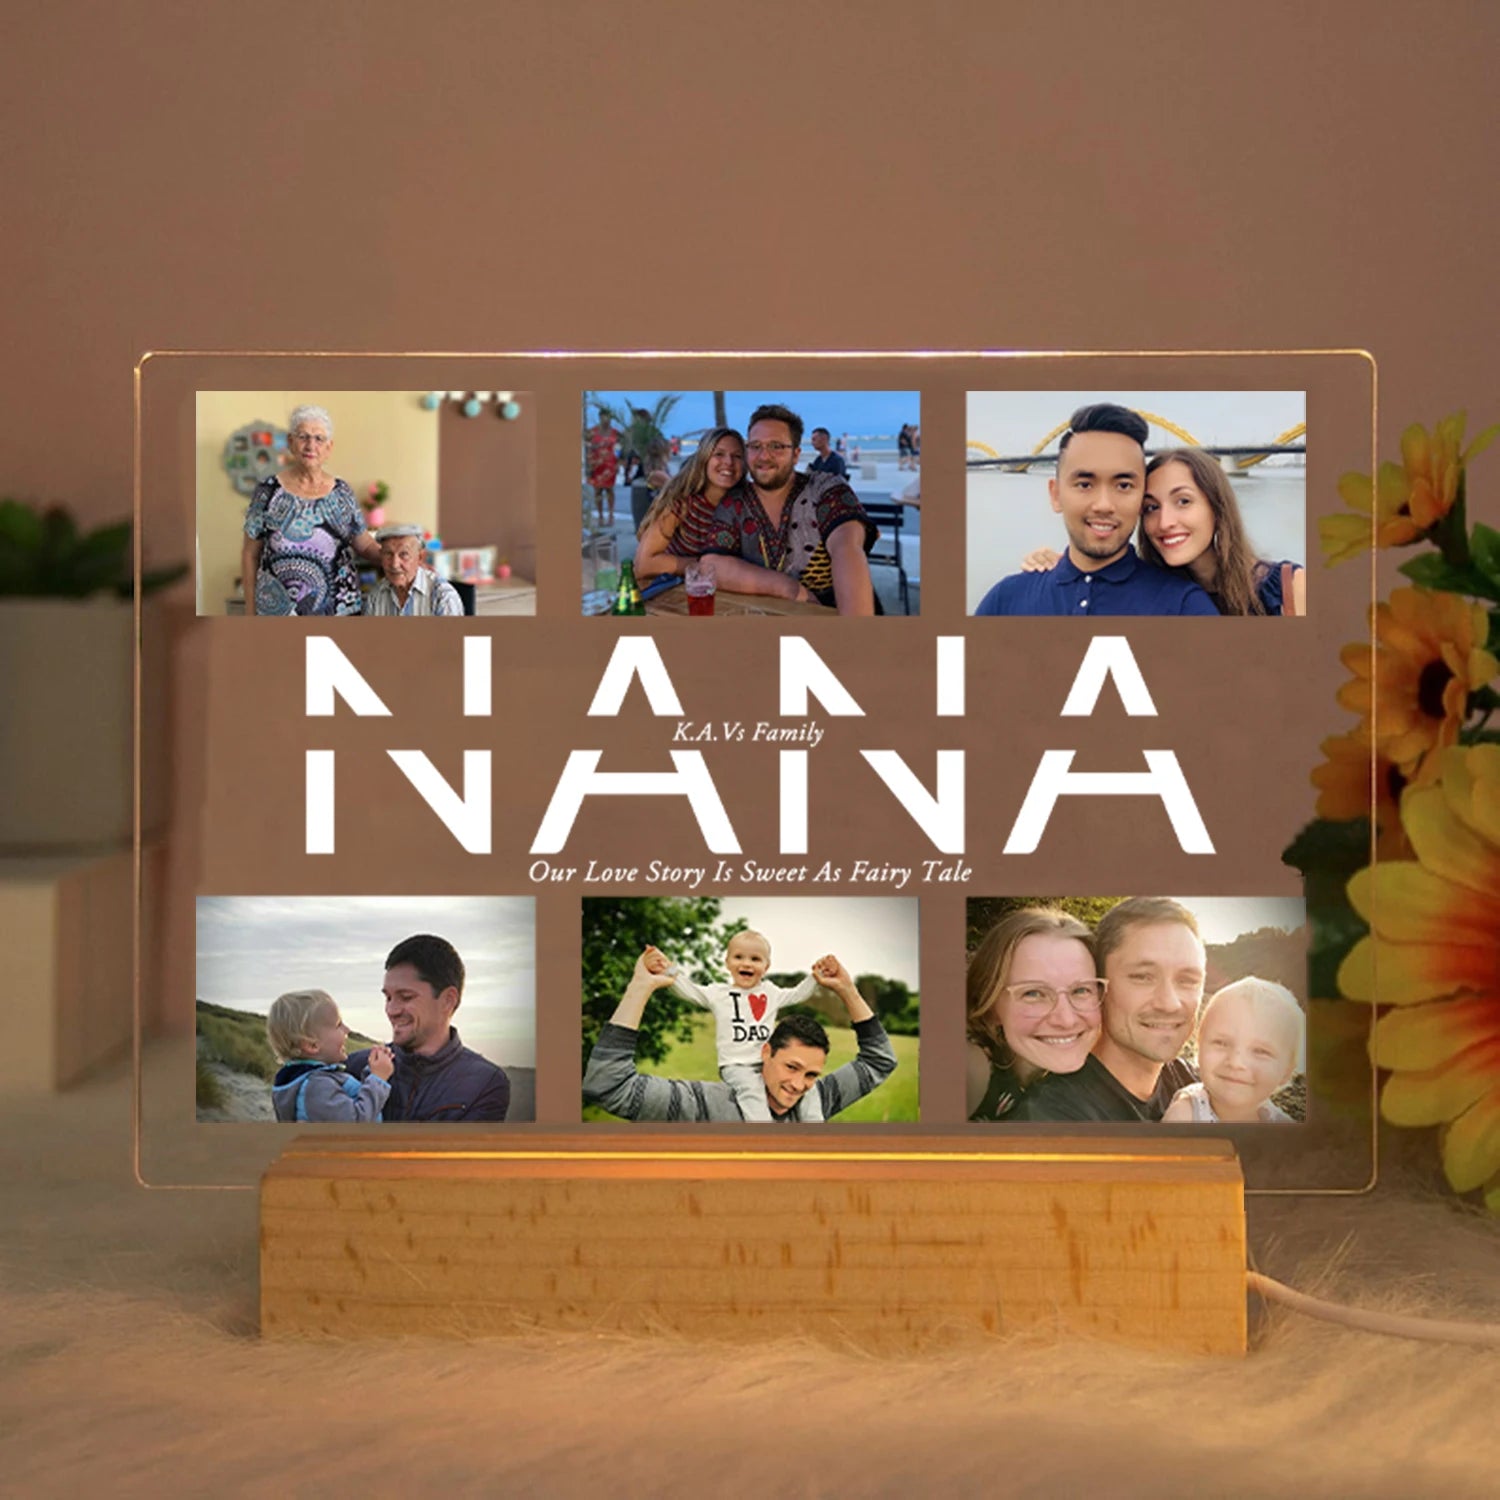 Personalized Acrylic Lamp with Custom Photo and Text - Ideal Bedroom Night Light for MOM DAD LOVE Friend Family Day Wedding Birthday Gift Present NANA / Warm Light